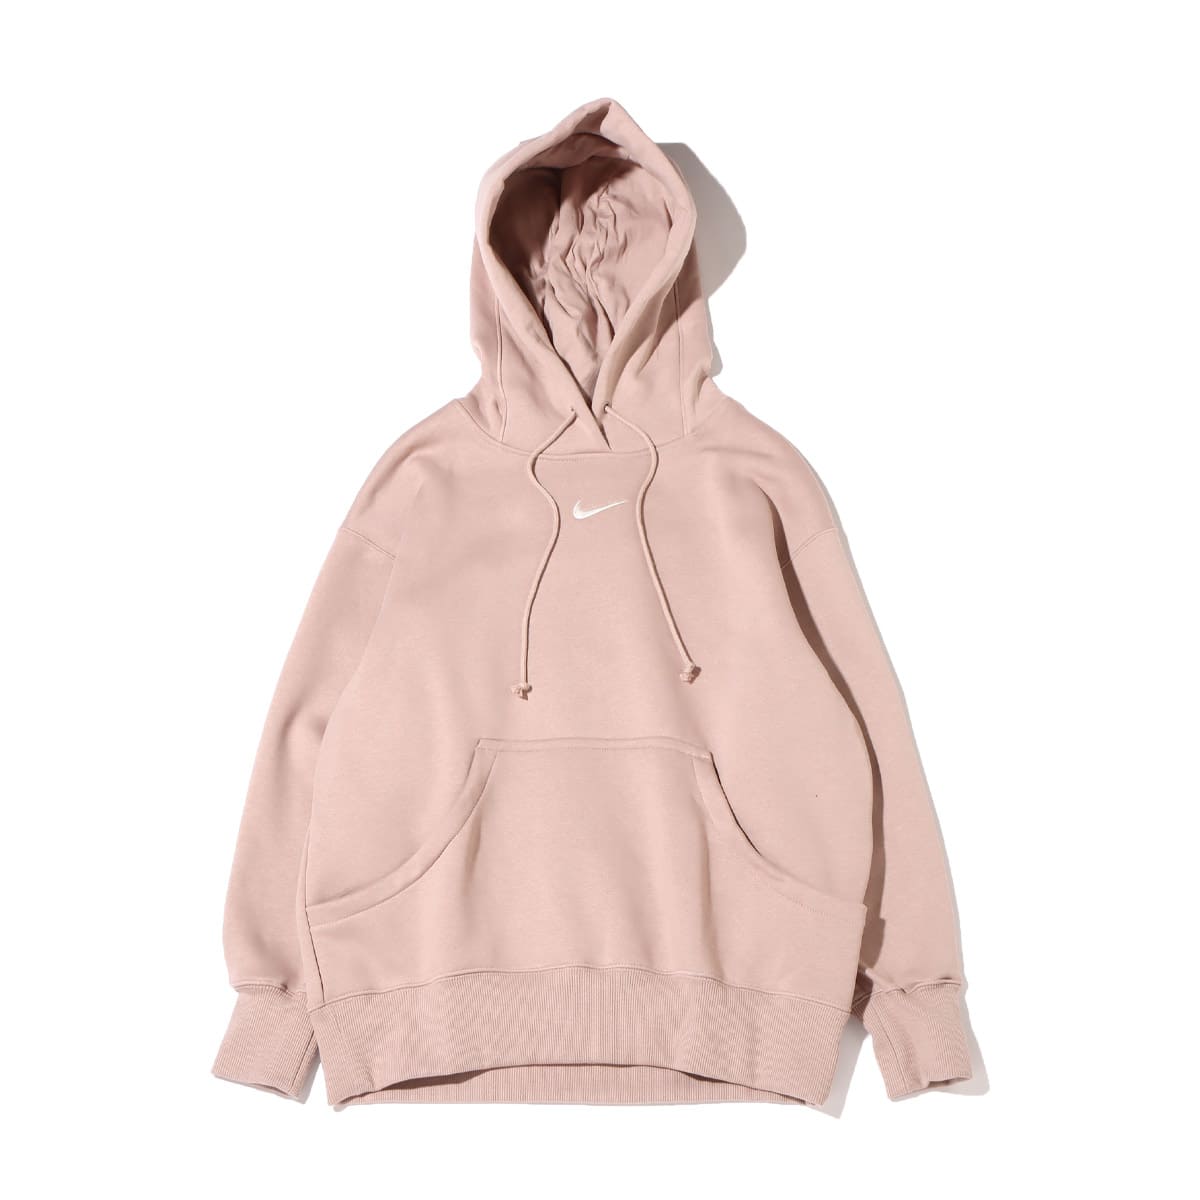 NIKE AS W NSW PHNX FLC OS PO HOODIE DIFFUSED TAUPE/SAIL 23SP-I